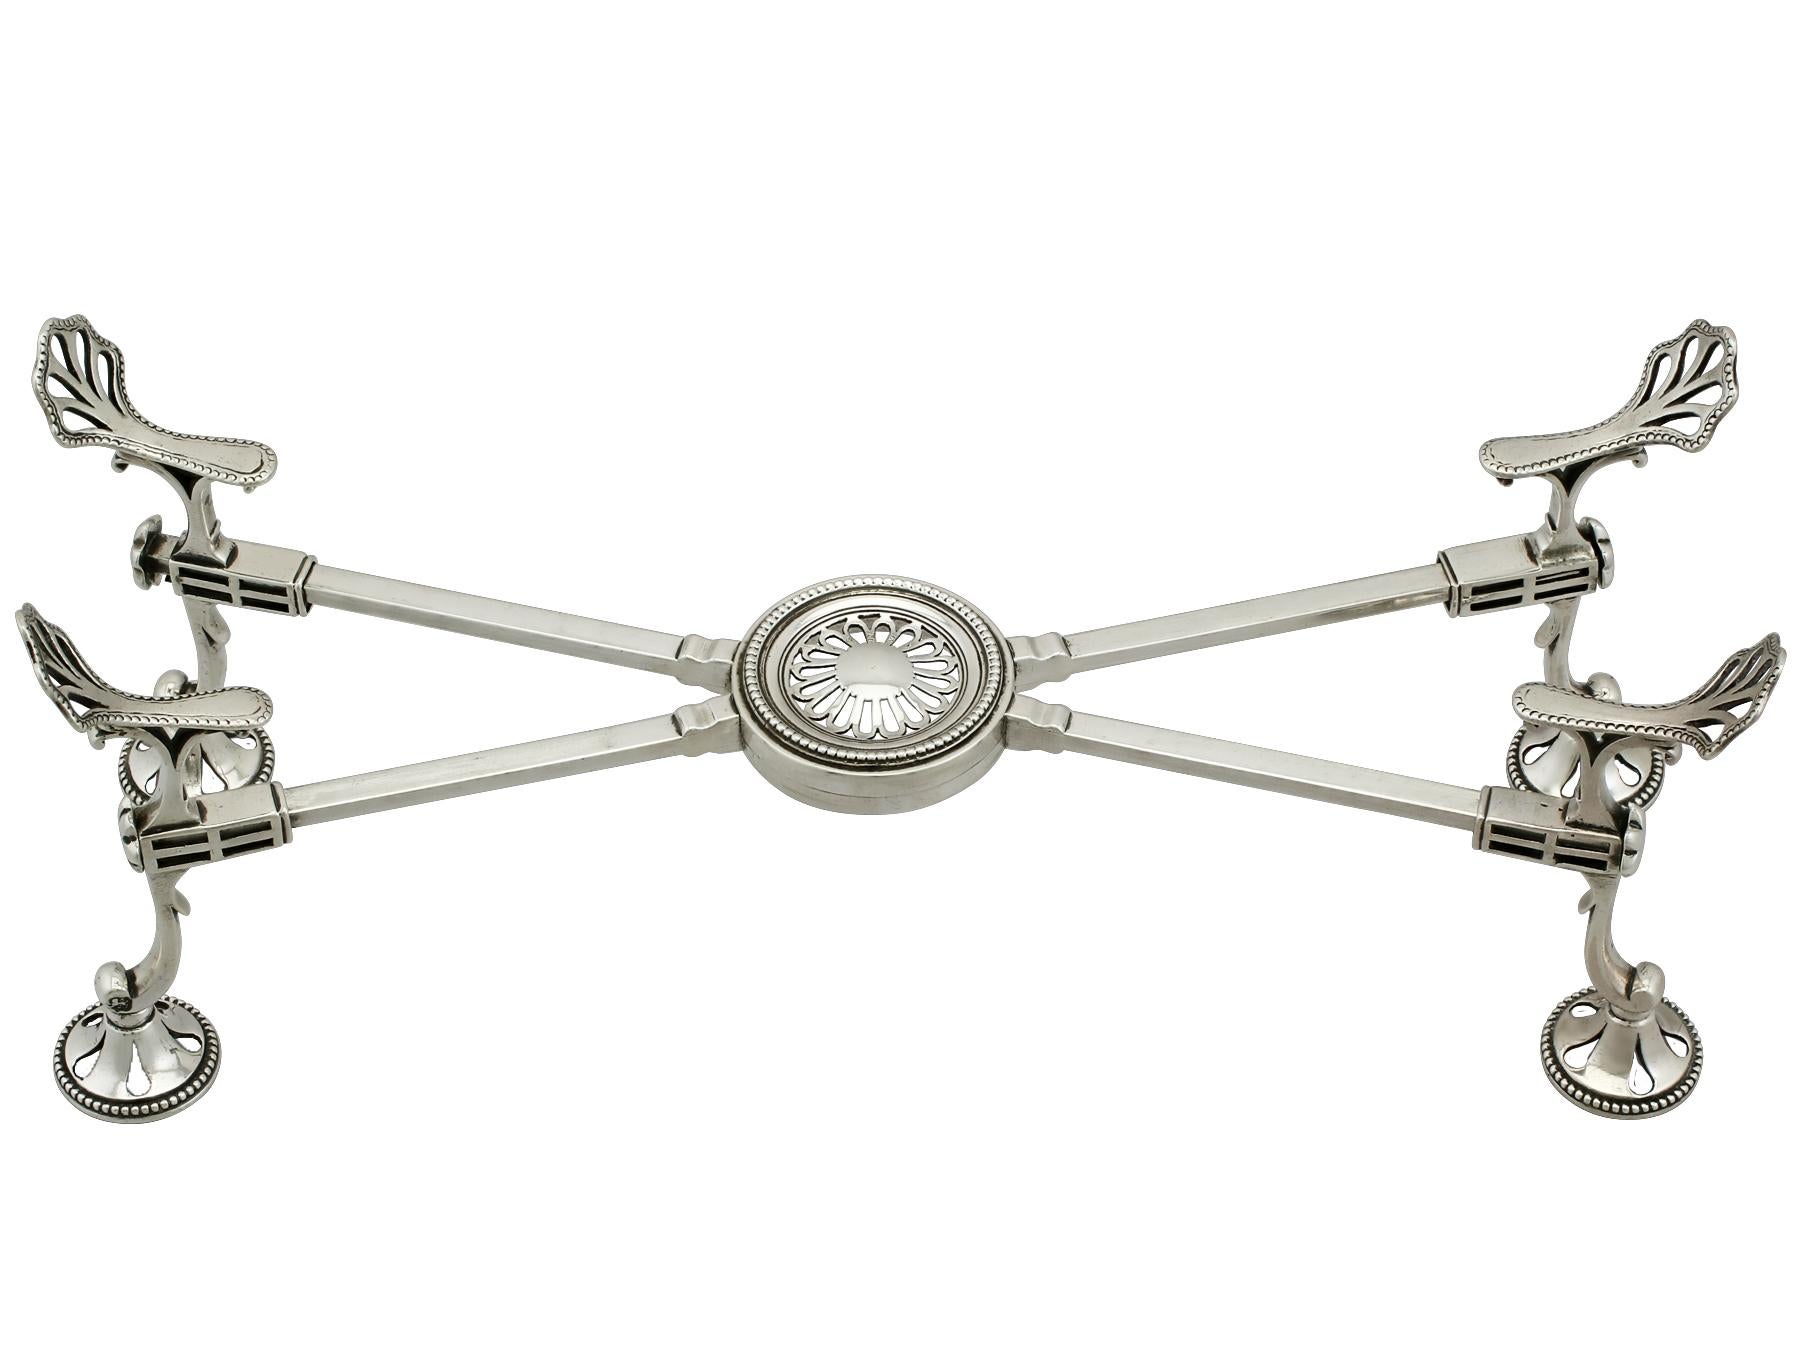 An exceptional, fine and impressive antique George III English sterling silver dish cross; an addition to our Georgian dining silverware collection.

This exceptional antique Georgian silver dish cross, in sterling standard, has a plain Regency